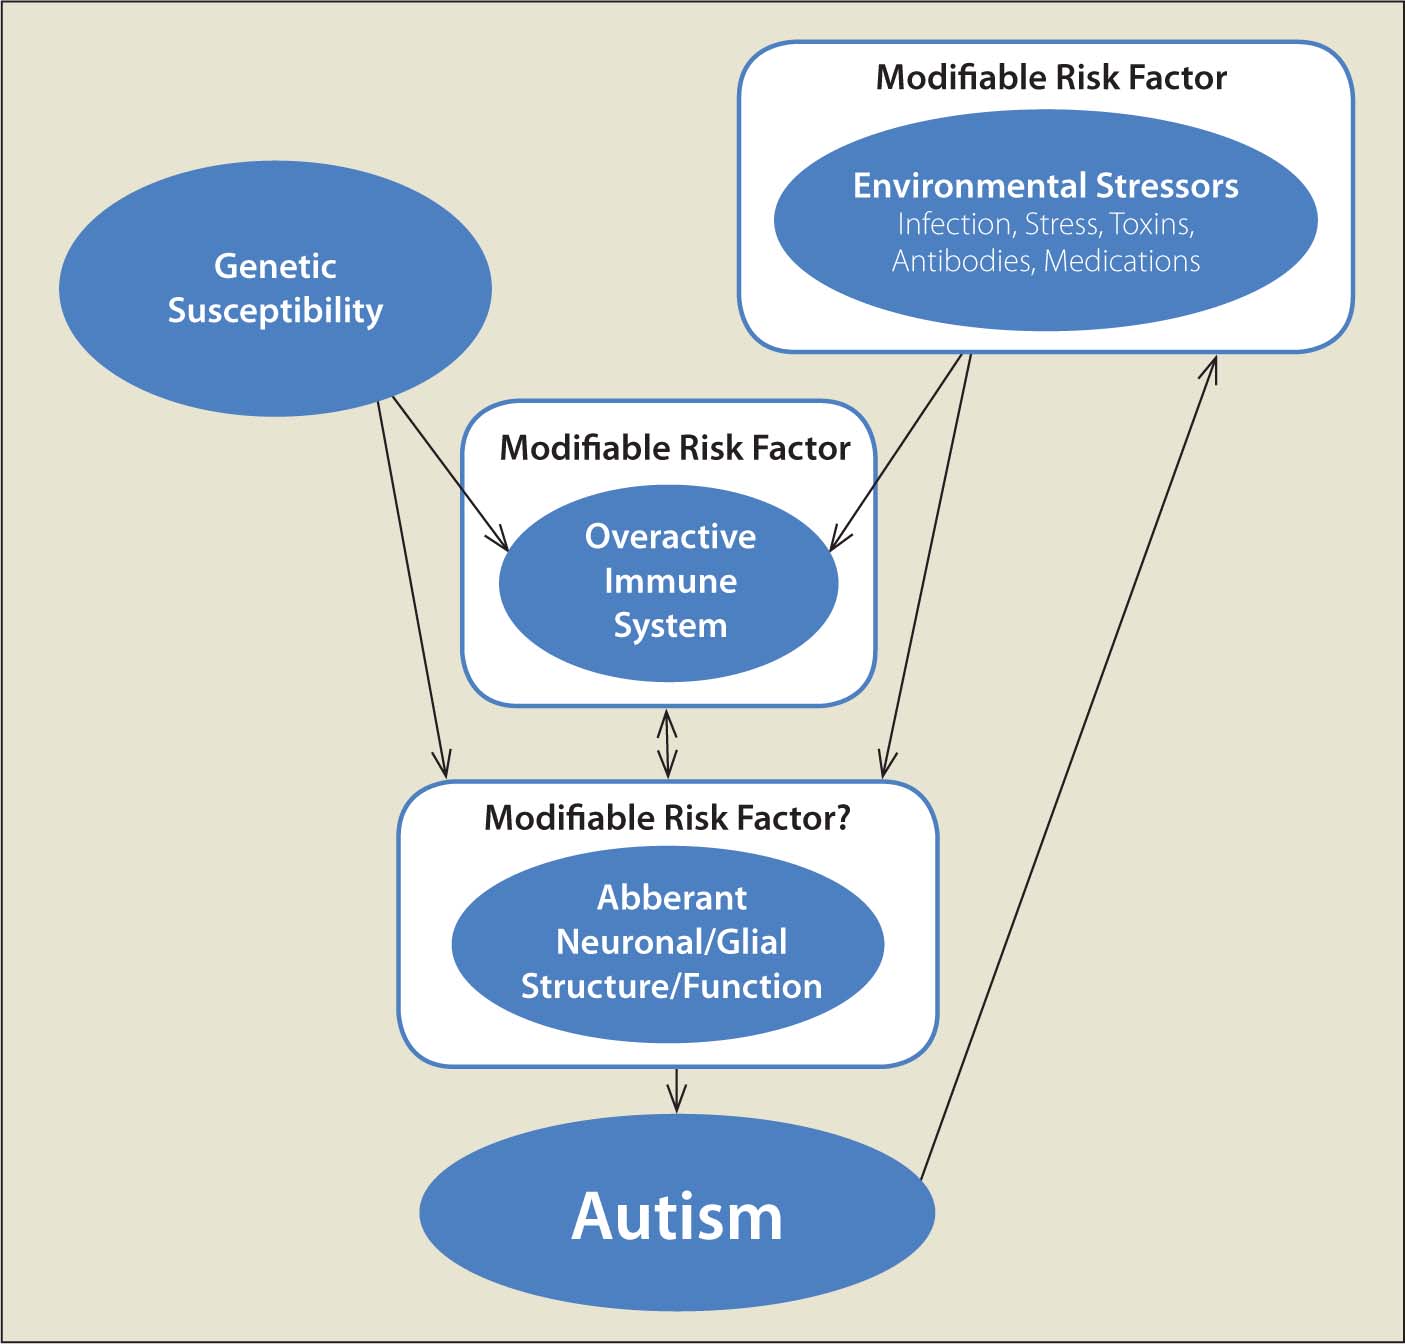 Immune Response and Inflammation in Autism Spectrum Disorder